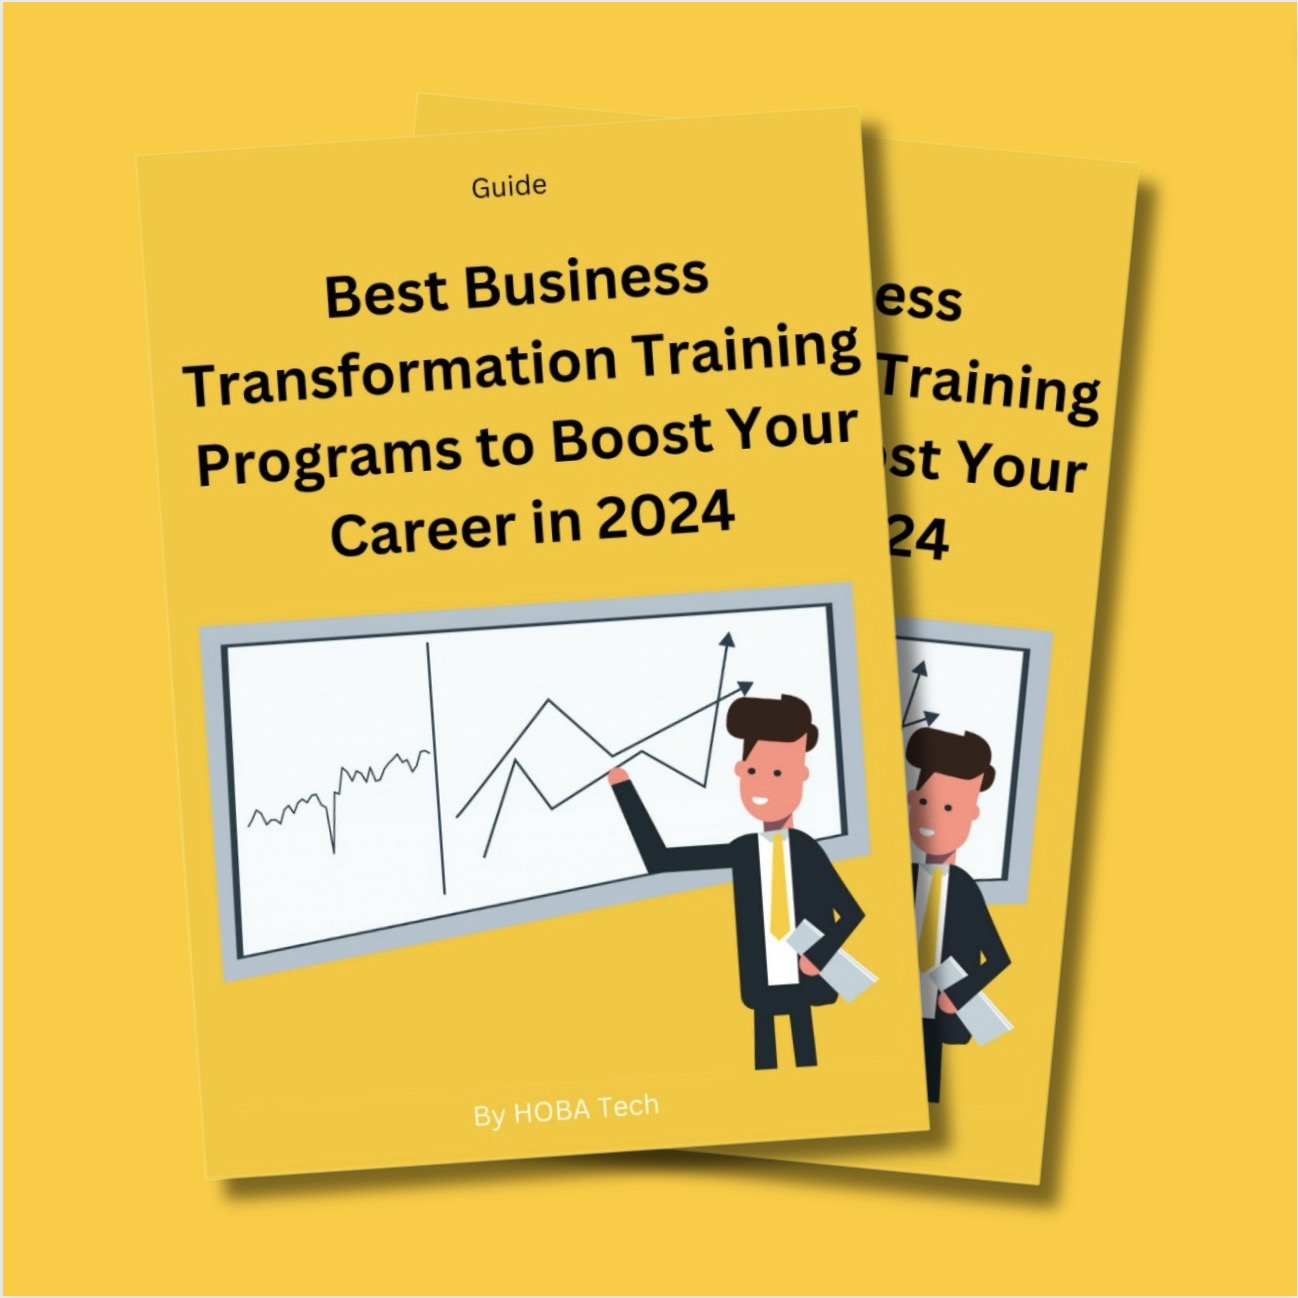 Best Business Transformation Training Programs Guide 2024